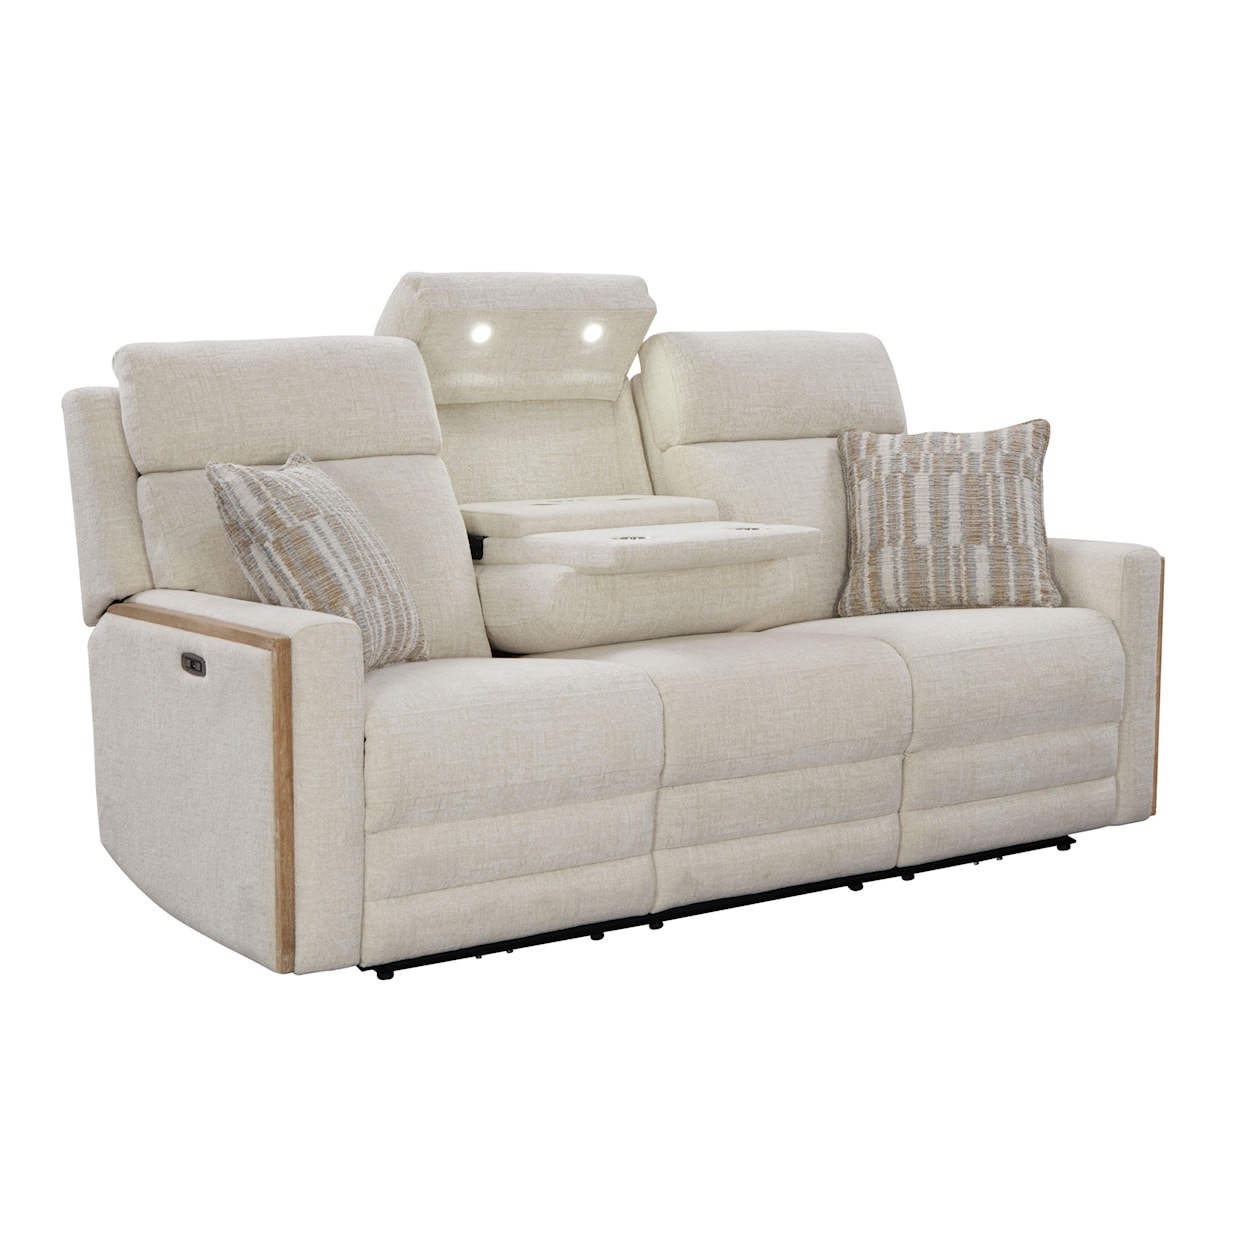 Synergy Home Furnishings Pearly Power Recliner 